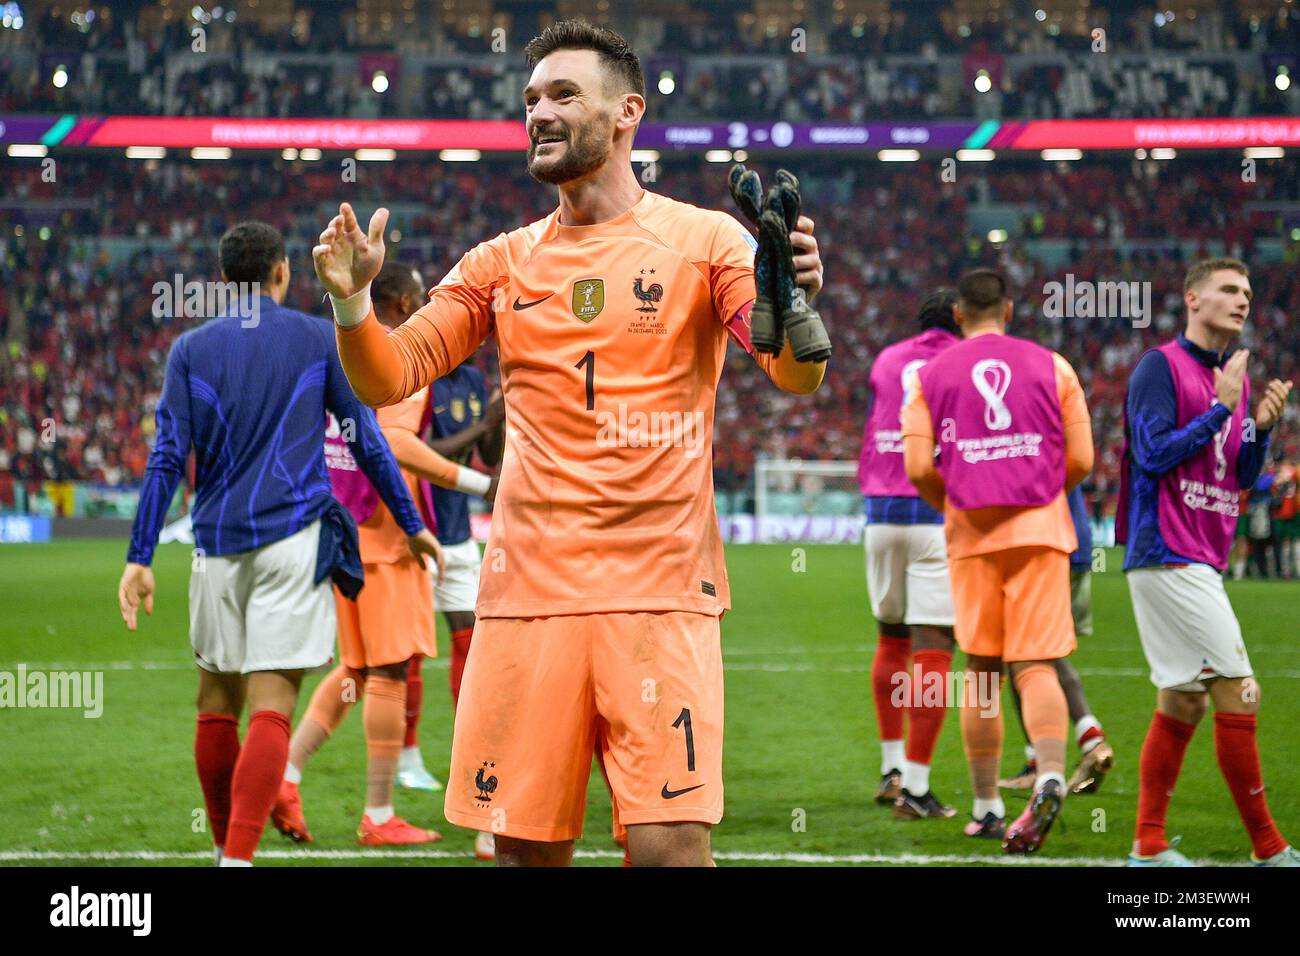 AL KHOR, QATAR - DECEMBER 14: Hugo Lloris of France reacts after the Semi Final - FIFA World Cup Qatar 2022 match between France and Morocco at the Al Bayt Stadium on December 14, 2022 in Al Khor, Qatar (Photo by Pablo Morano/BSR Agency) Stock Photo